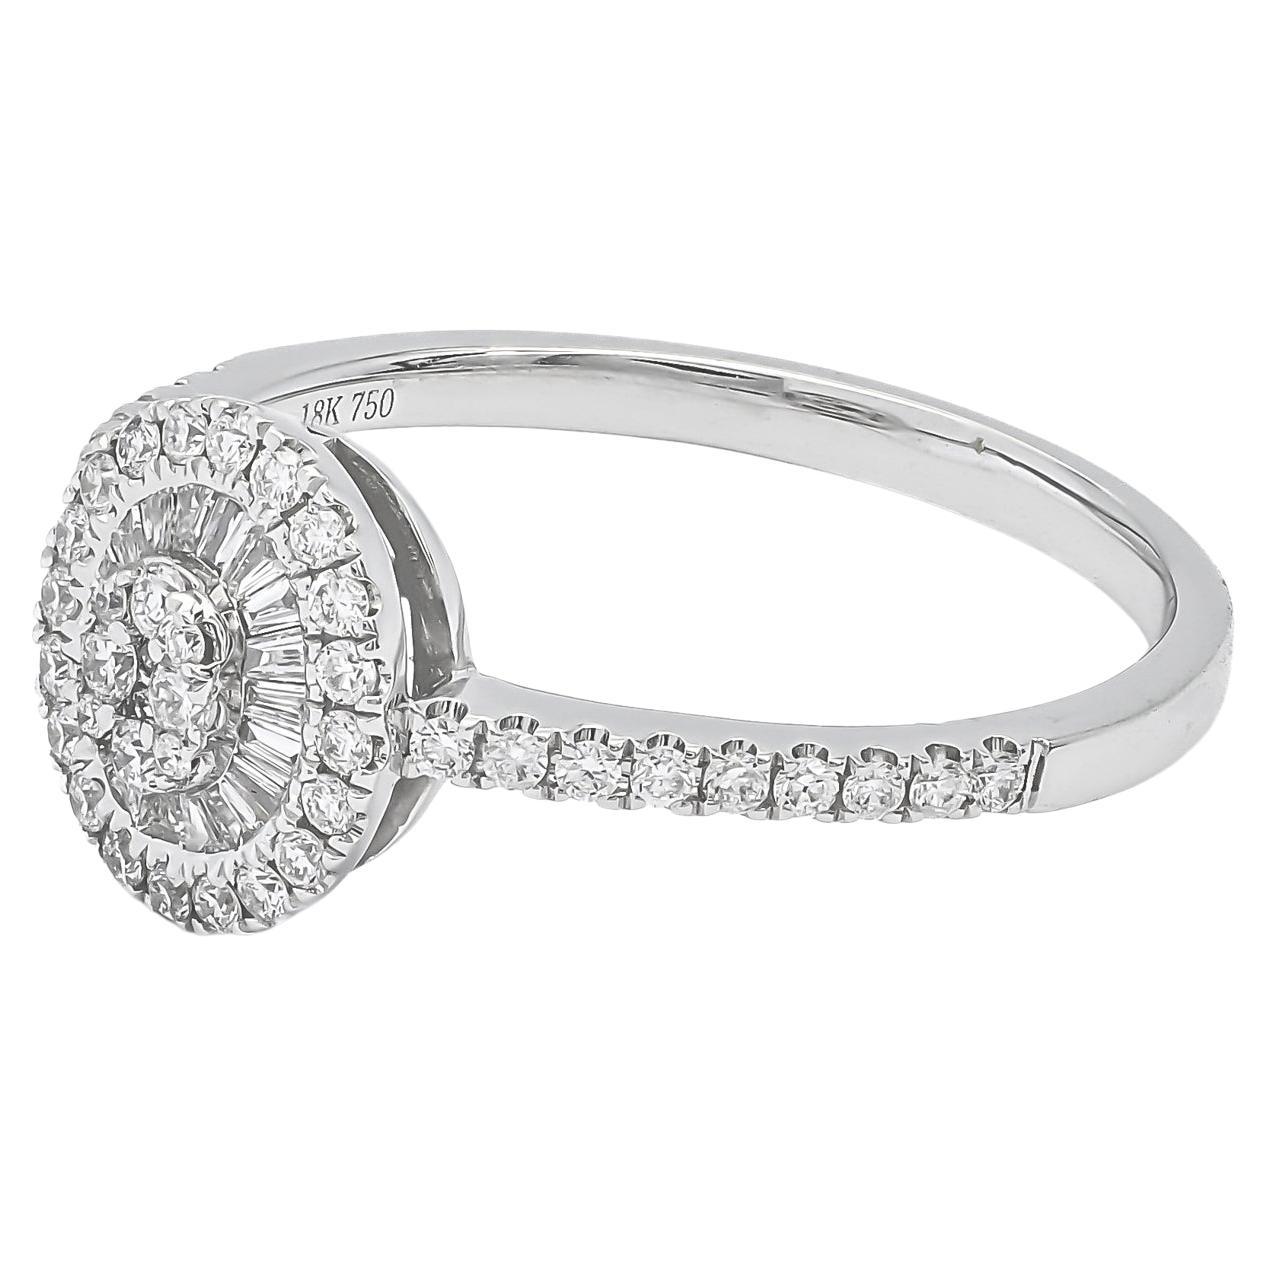 This exquisite engagement ring is crafted with a cluster of dazzling round cut diamonds set in a starburst pattern, beautifully accented by round brilliant and baguette diamonds with a beautiful delicate shank. 


Metal: 18kt White Gold
Weight:2.50